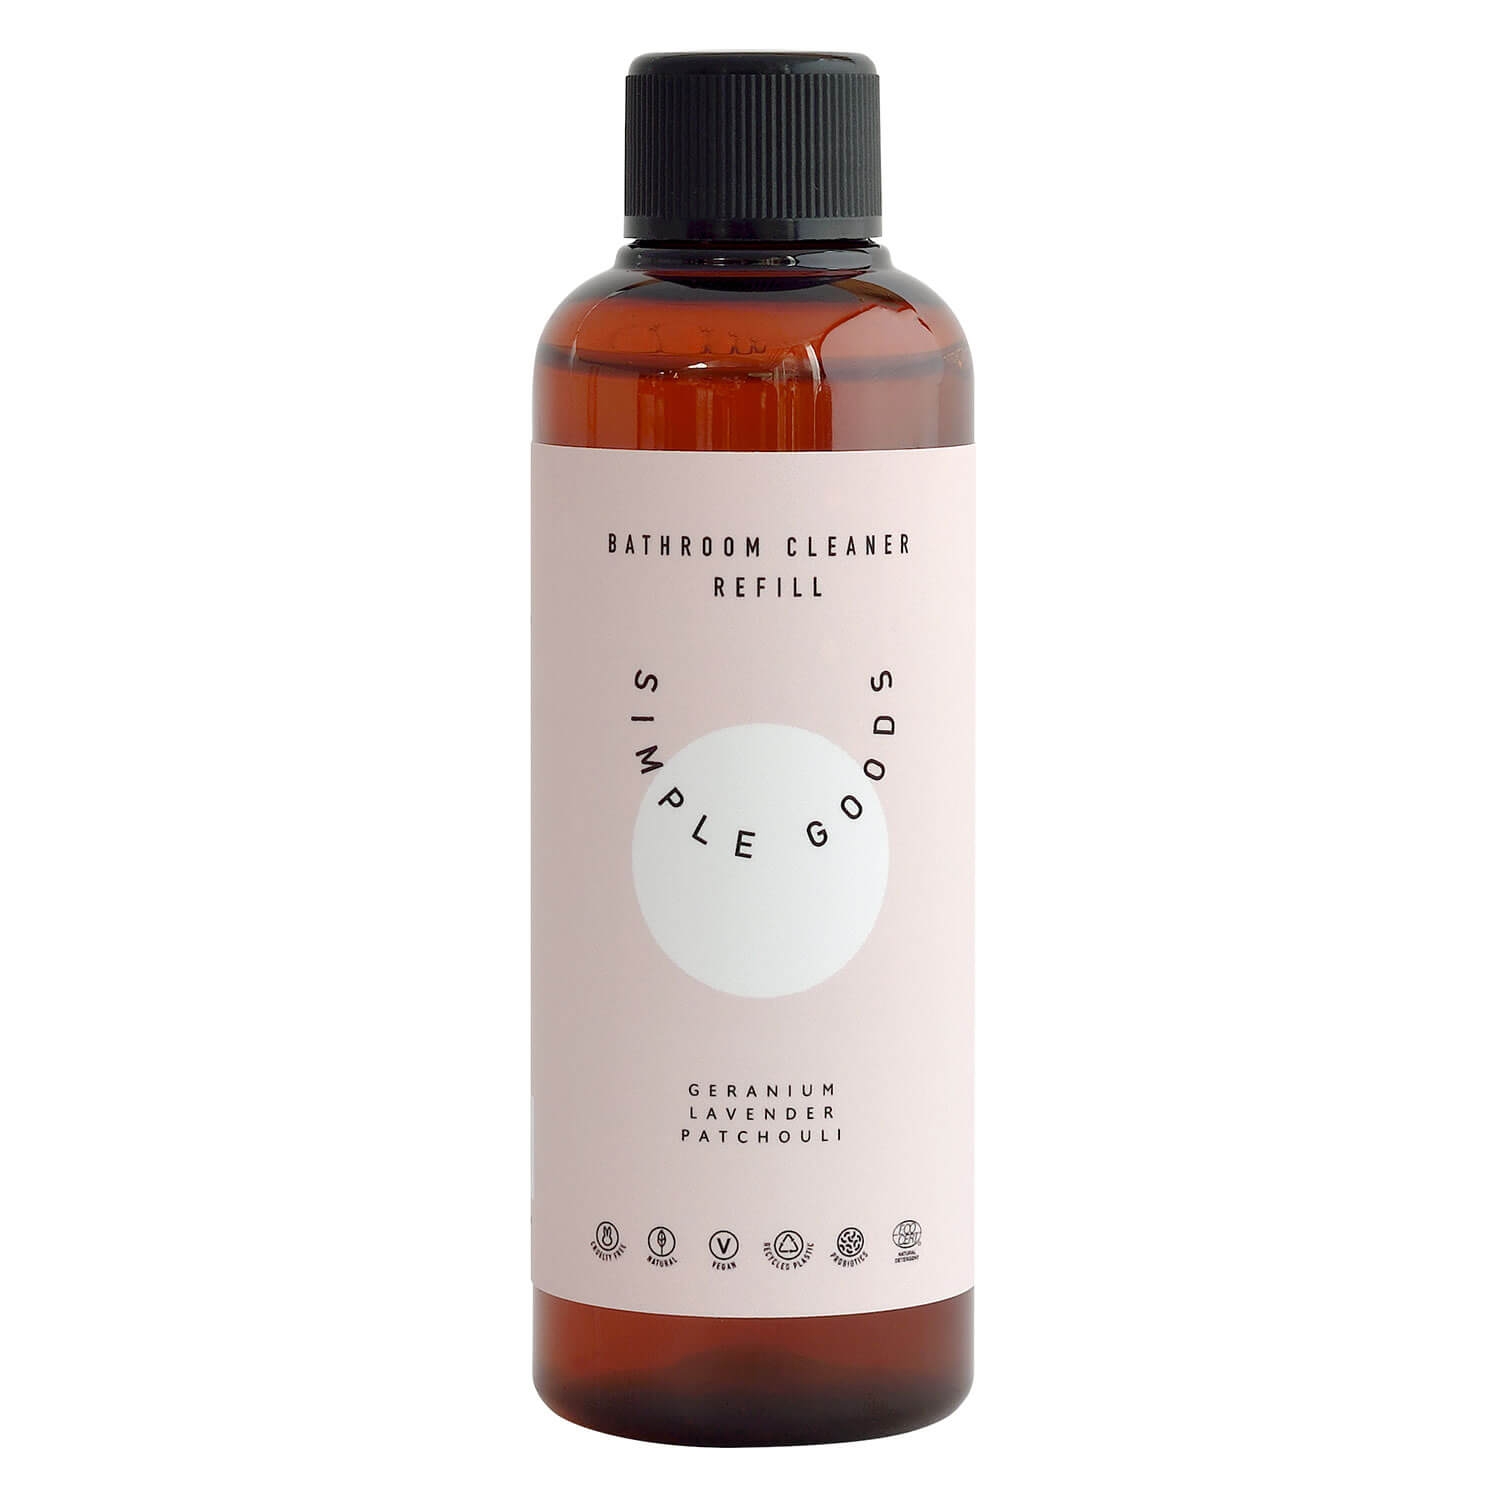 Product image from SIMPLE GOODS - Refill Bath Cleaner Geranium, Lavender, Patchouli